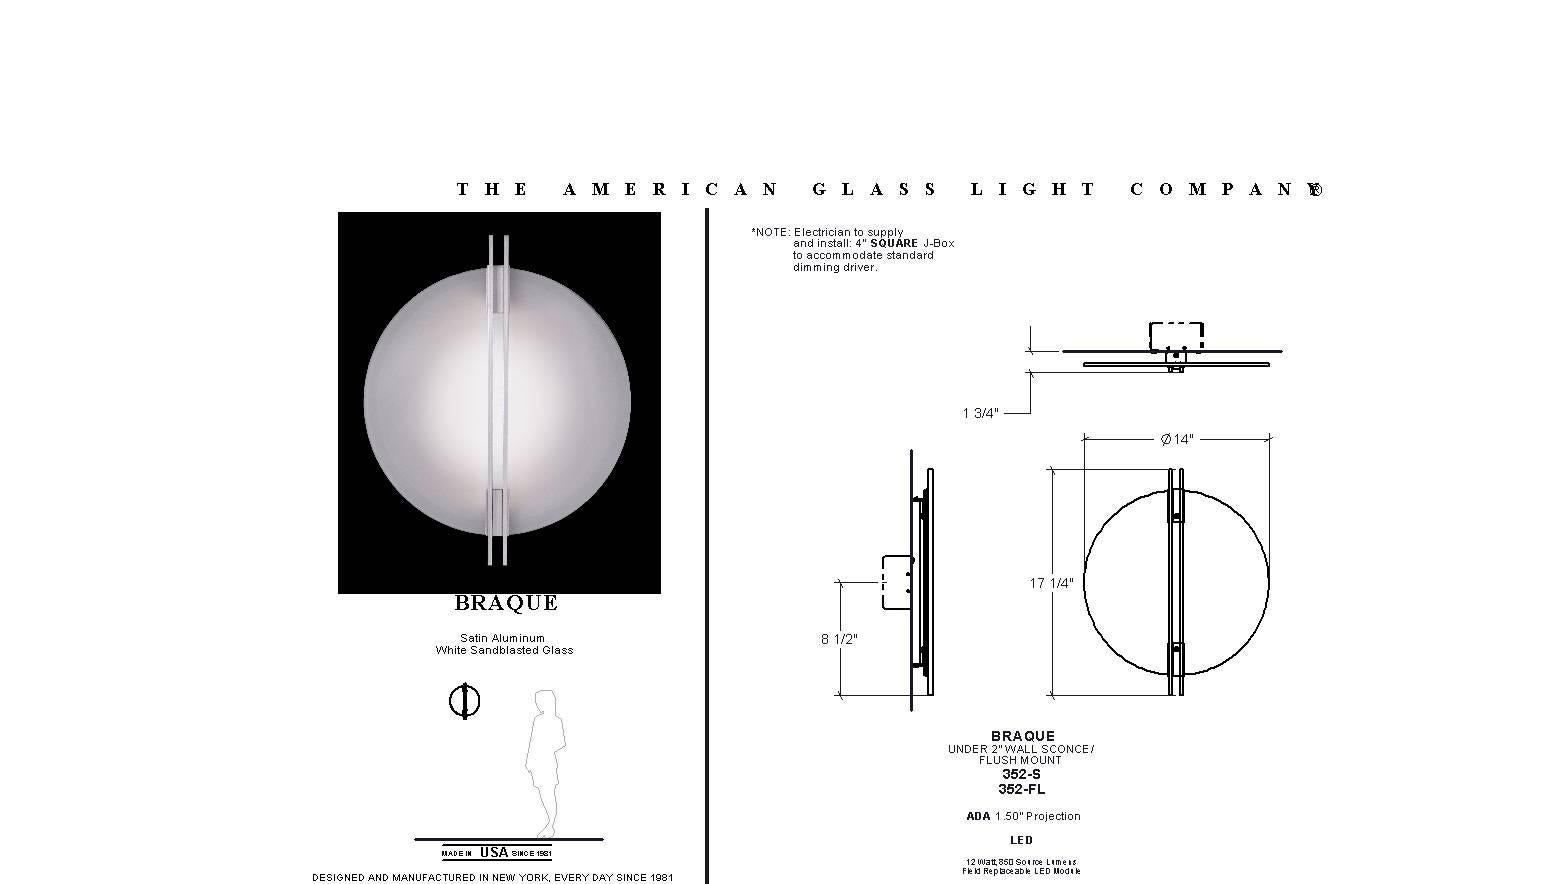 Low profile round white glass wall sconce. In the manner of streamlined moderne. Two vertical bars bisect the glass circle. LED lamping. Standard color temperature 3000k. 0-10 volt dimmable. Designed by Sandy Littman for The American Glass Light